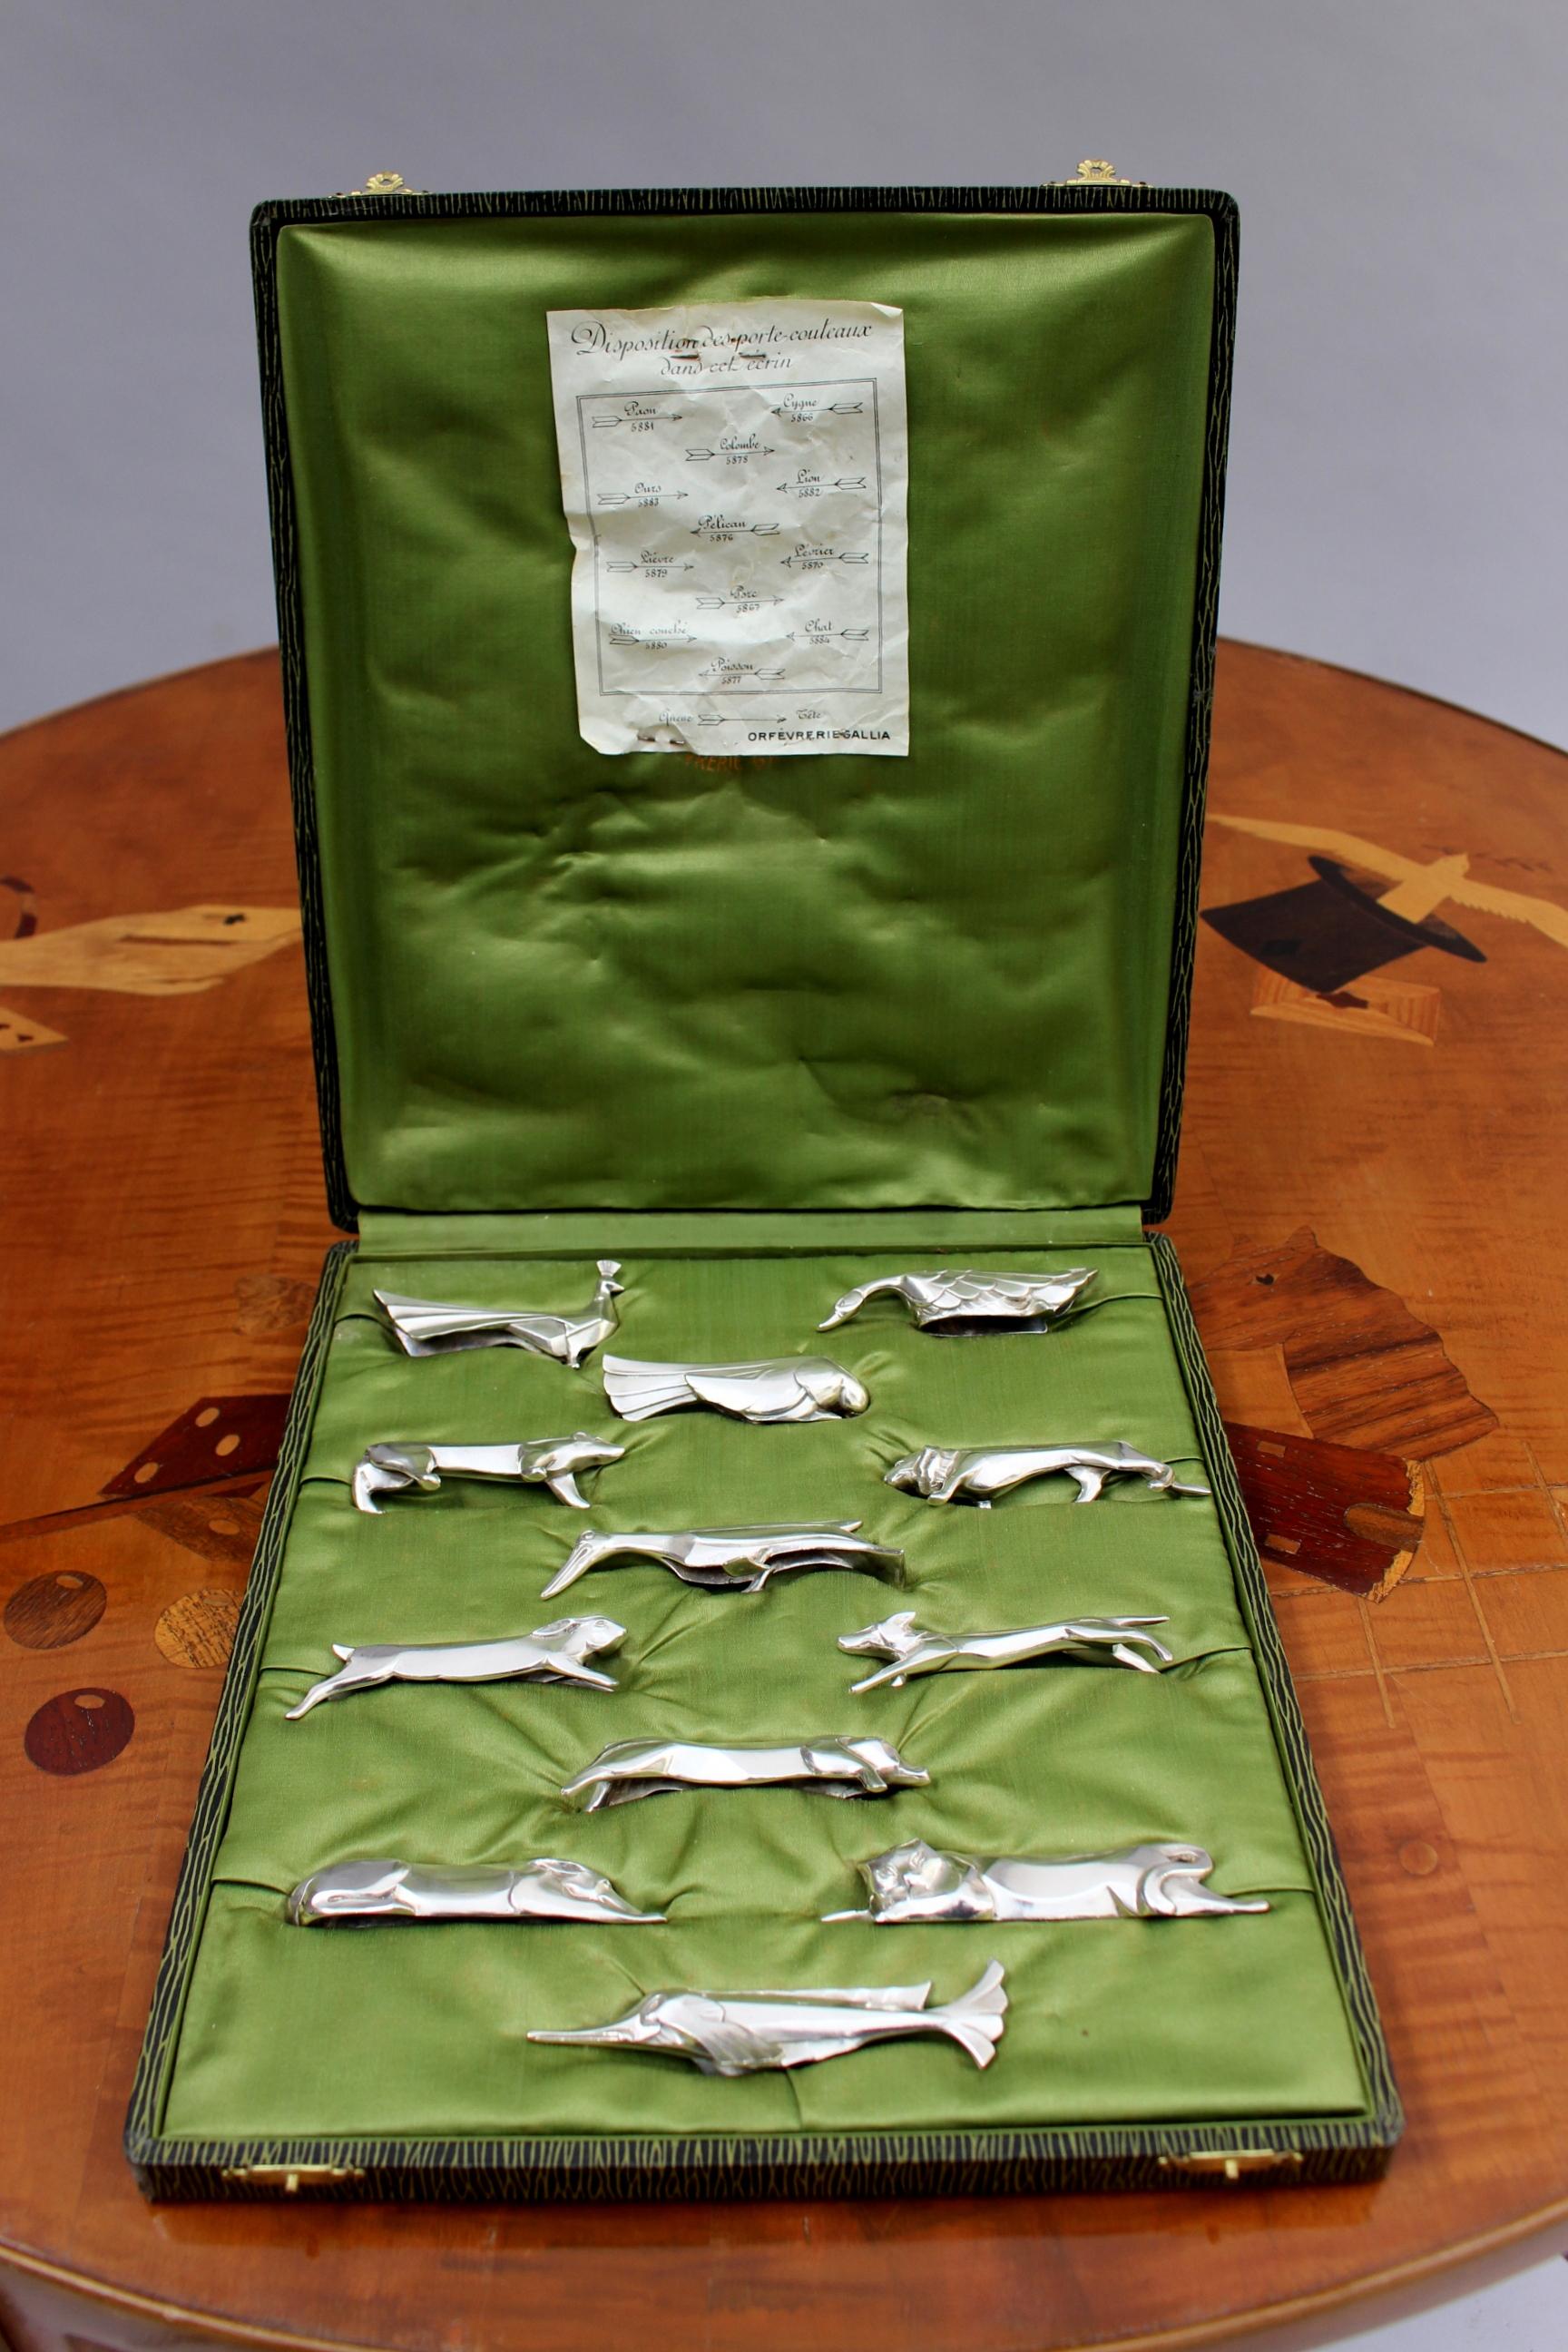 Set of 12 fine French Art Deco silver plated knife rests designed by Sandoz for the Gallia line of Christofle. All 12 animals are different.
Original case.

Average size of knife rests:
H 0.8 inch x L 4.3 inch x W 0.8 inch. 
?H 2 cm. x L 10.5